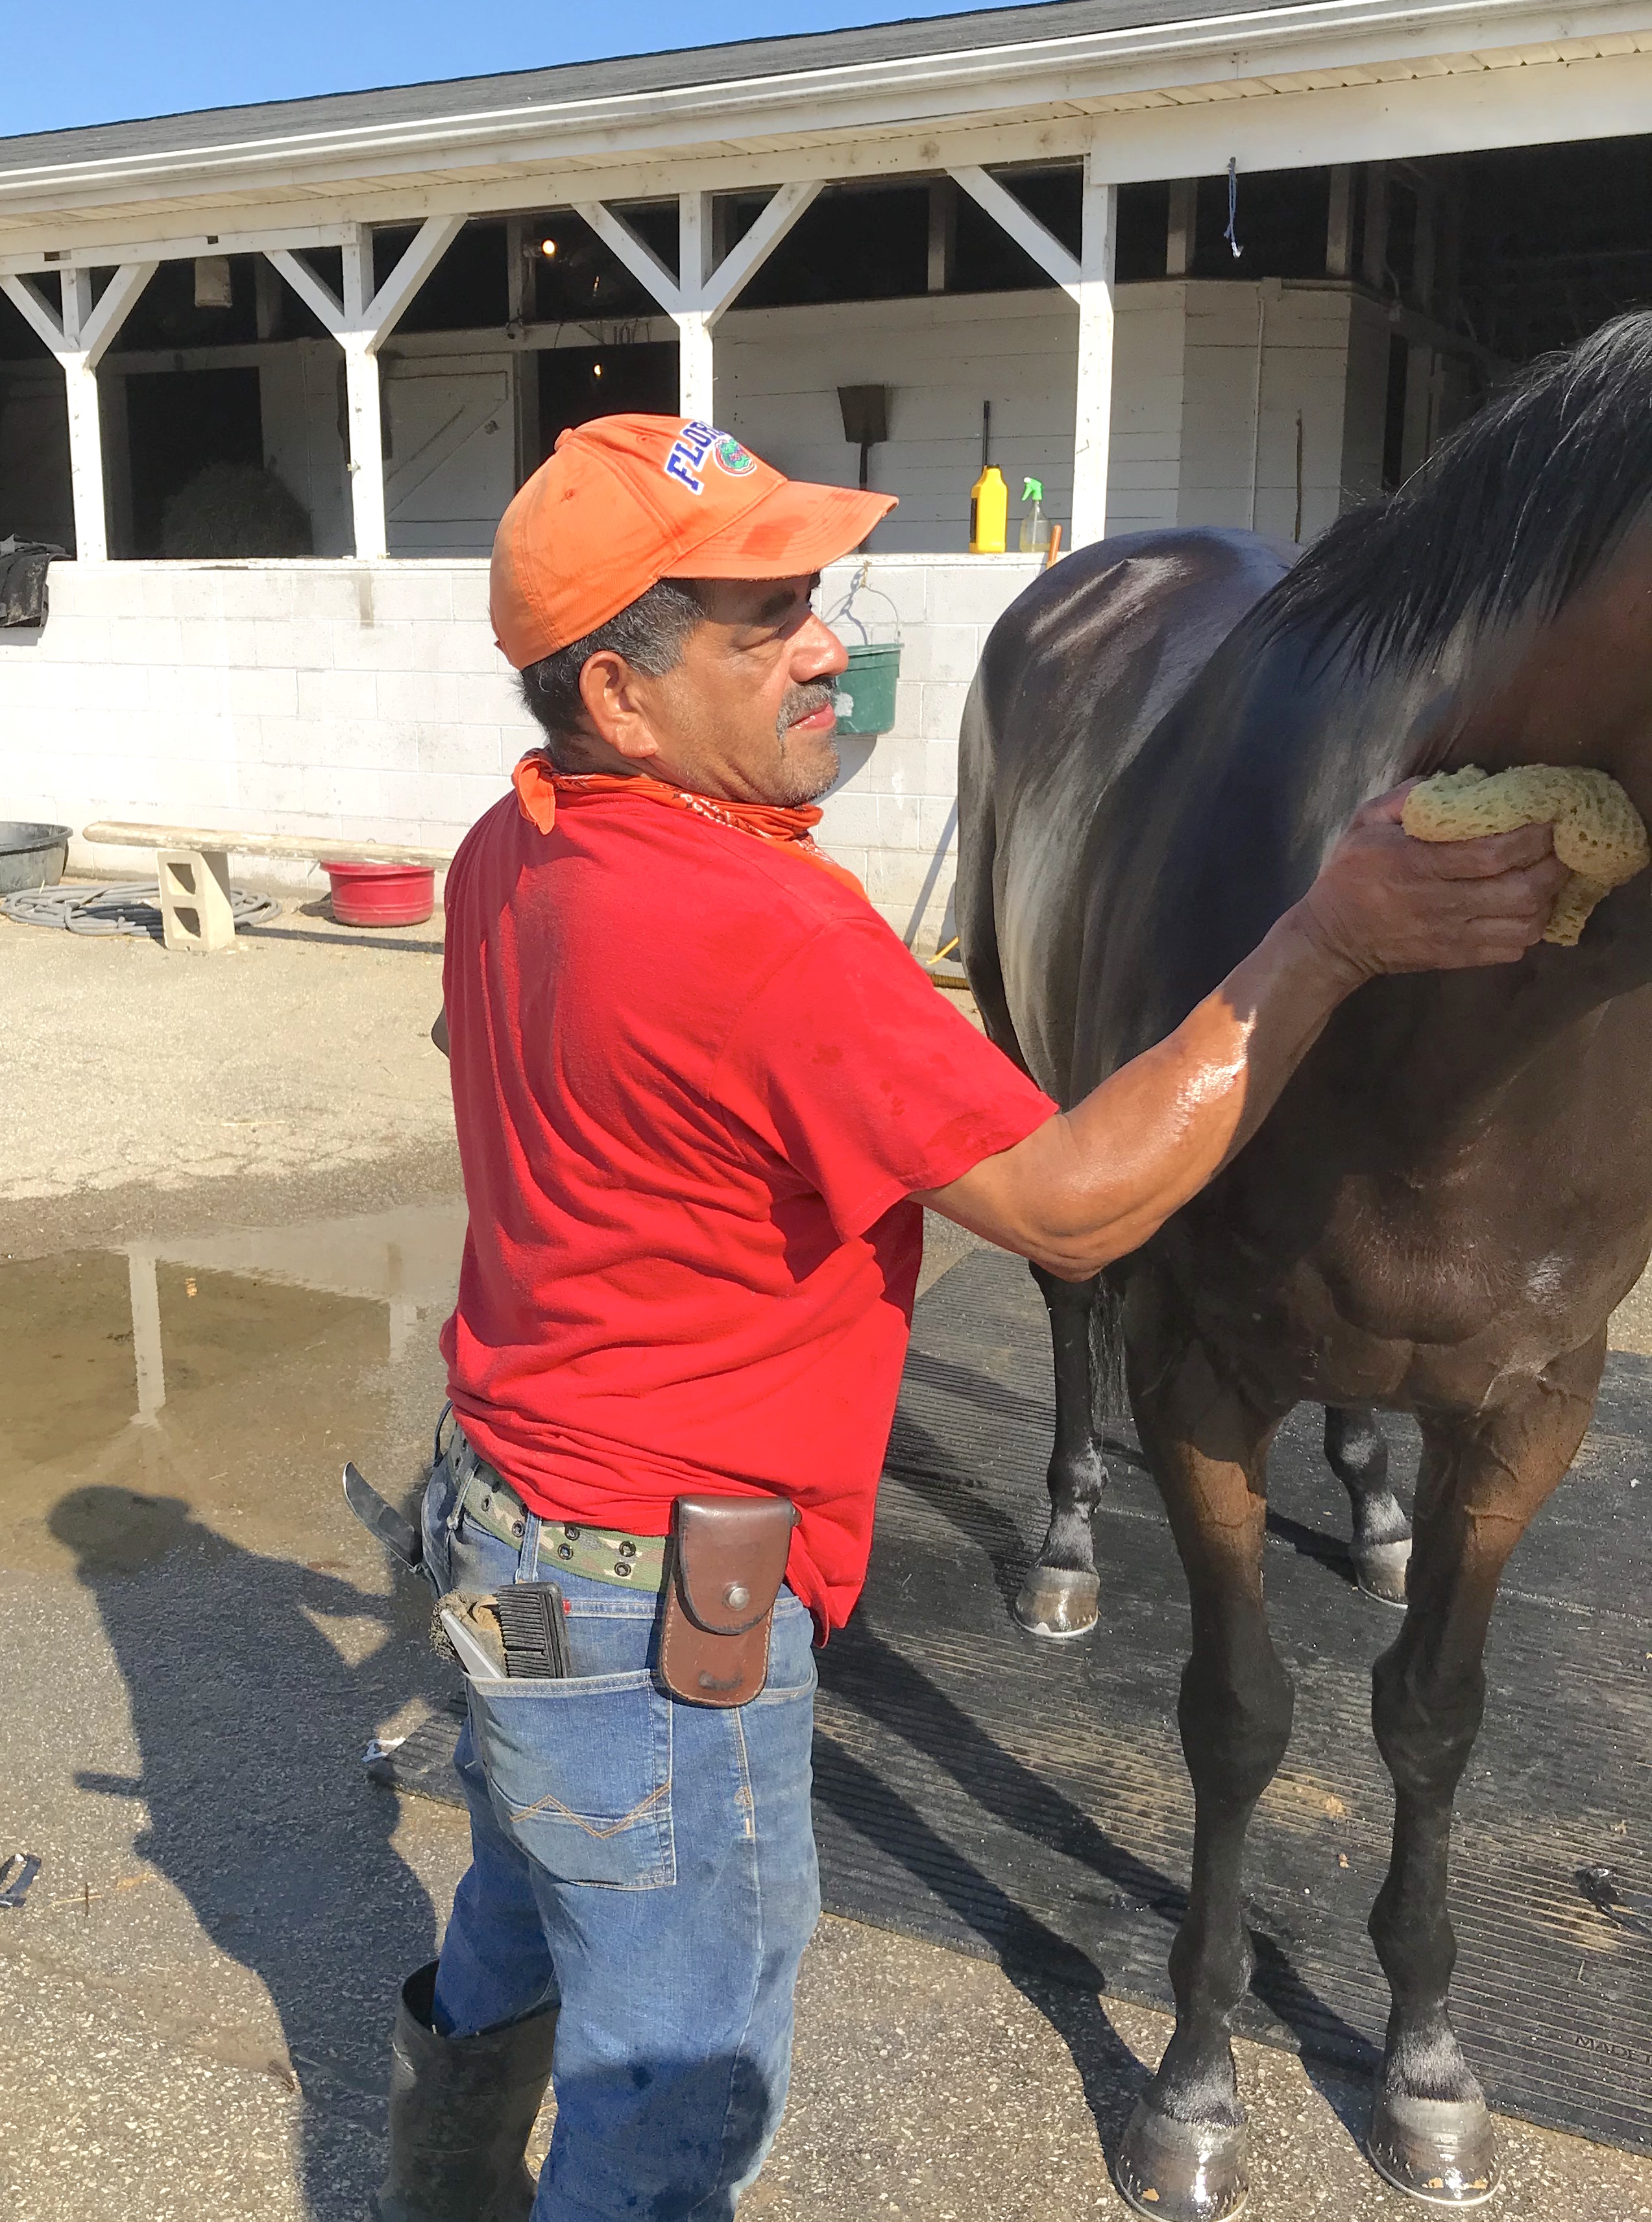 The horse comes first: “I thank God and this country for letting me work here,” says Aníbal Aguilar. Photo: Ken Snyder